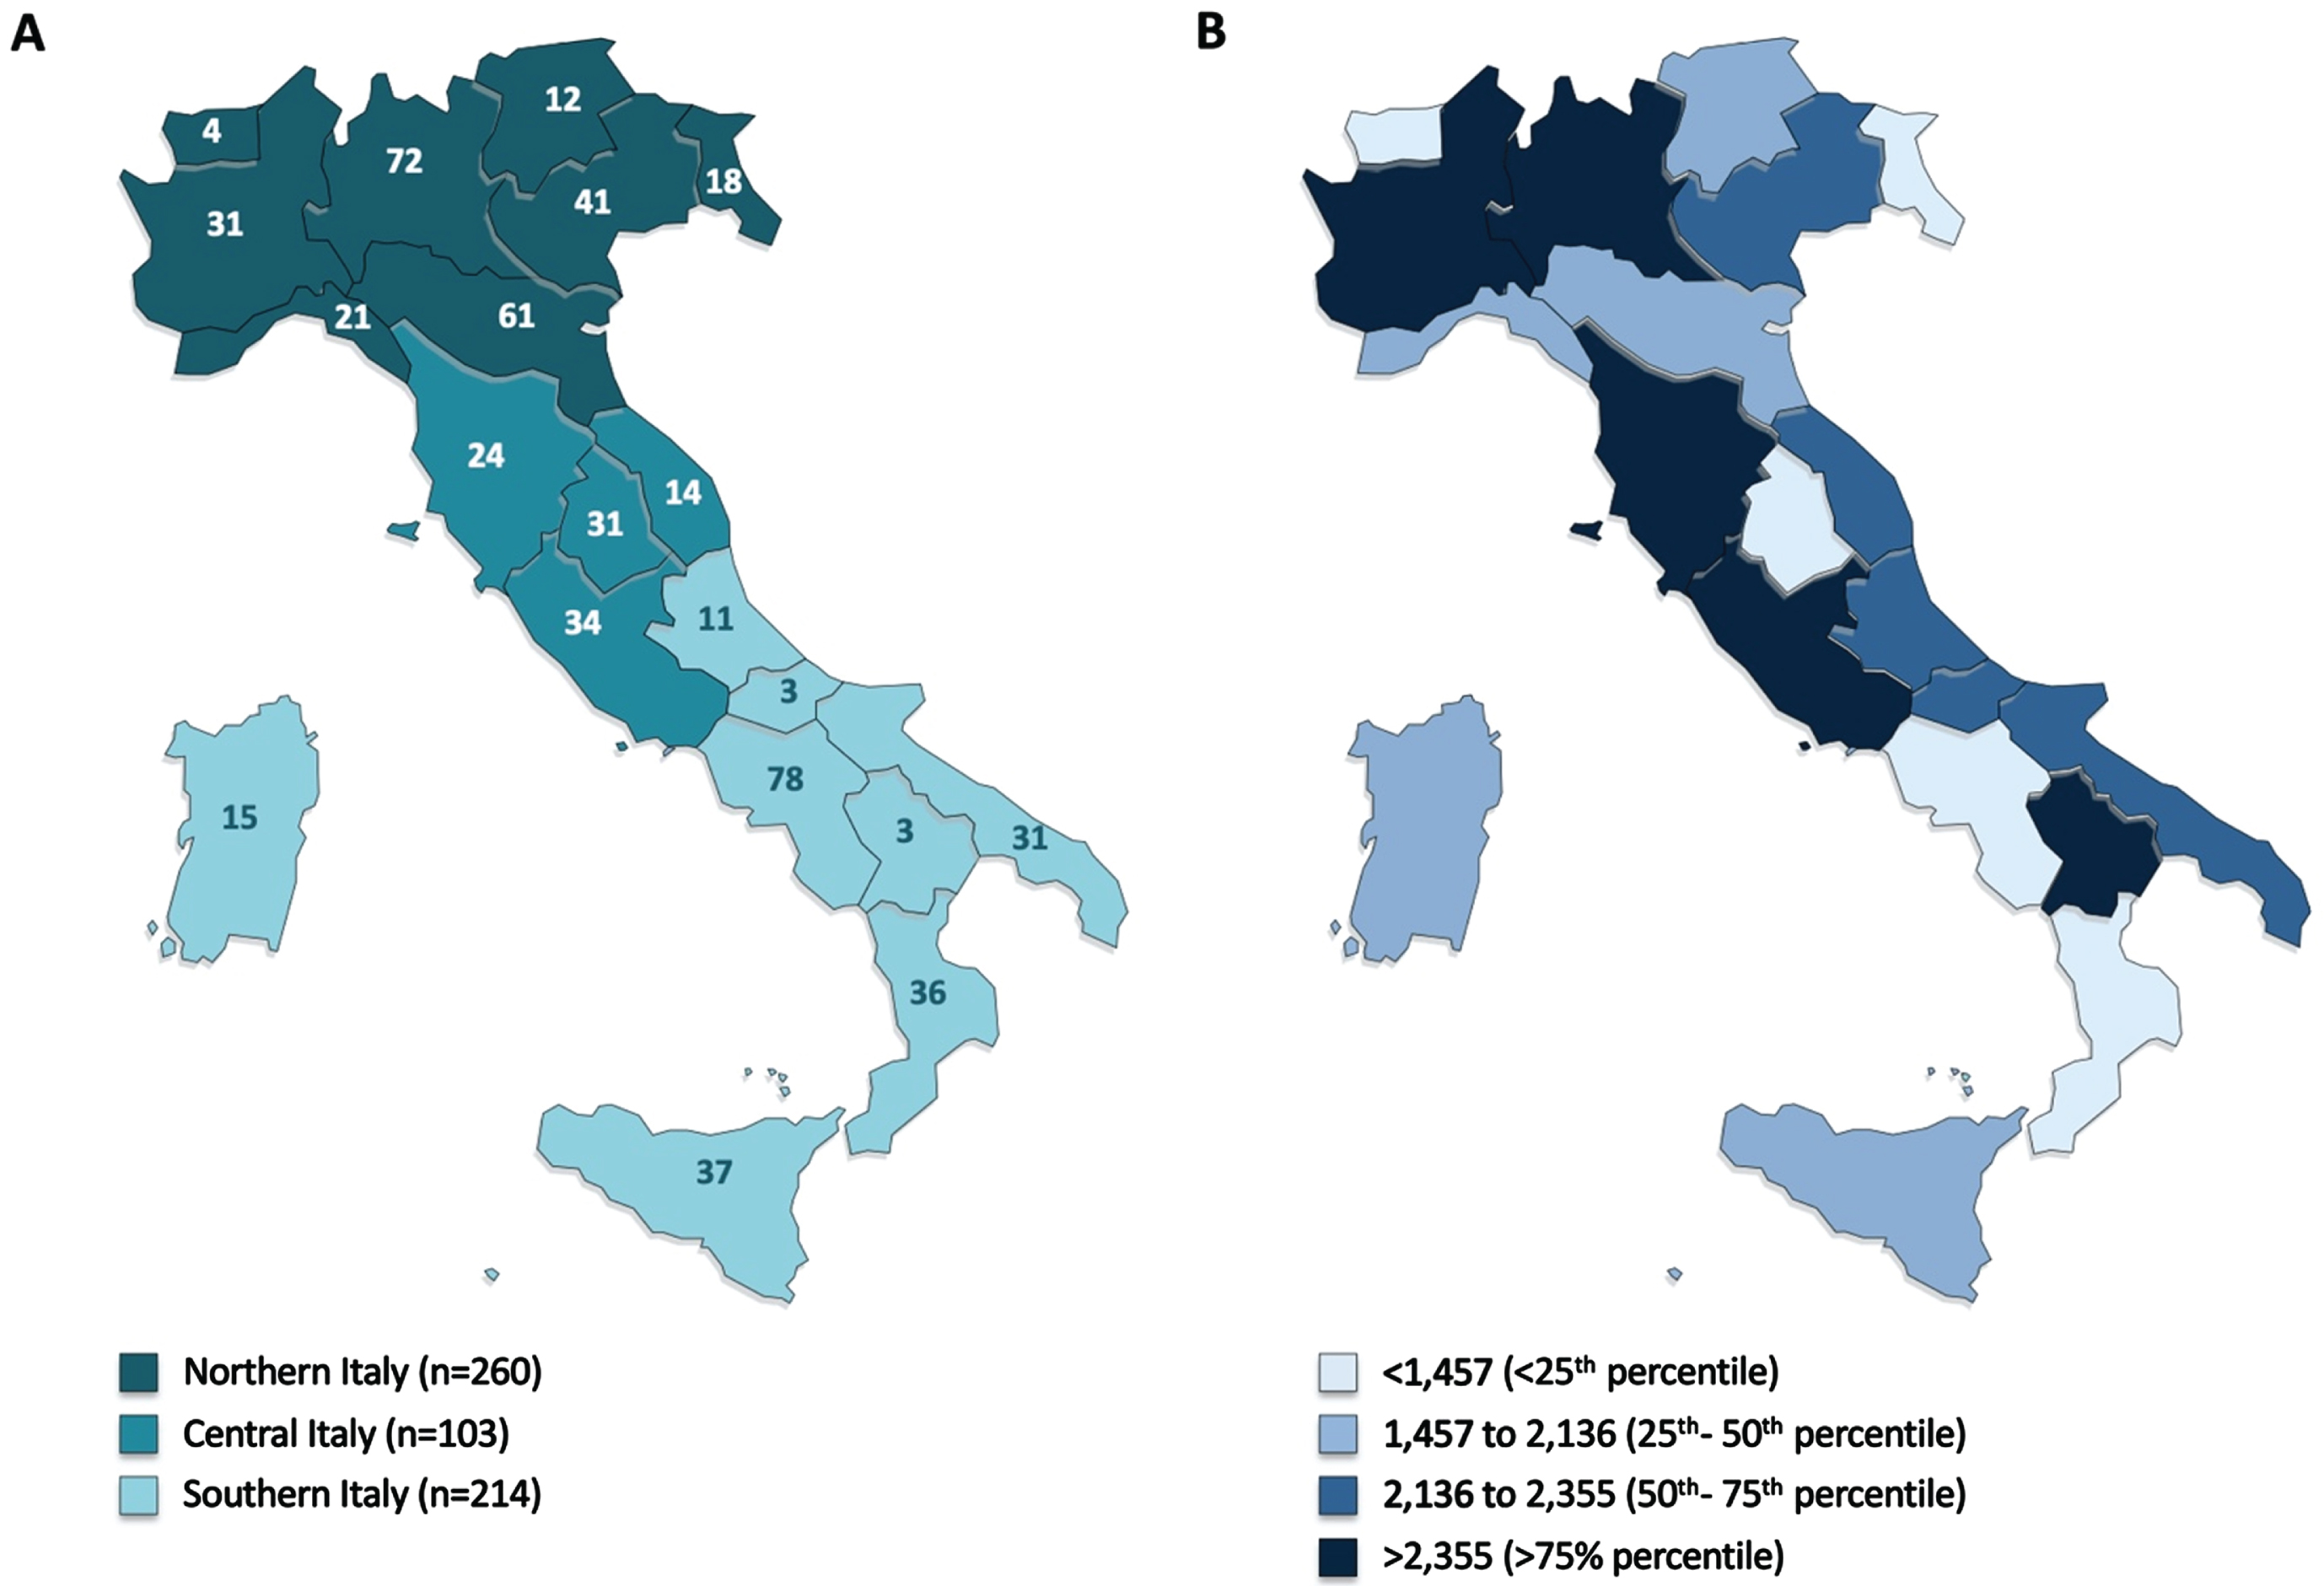 Geographic distribution of Italian CCDDs and Estimated mean number of dementia cases per CCDD. A) Number of CCDDs in each Italian region. Geographic macro-areas were defined according to the Italian National Institute of Statistics (ISTAT) categorization. B) Estimated mean number of dementia cases per CCDD at the regional level. Dementia cases were estimated by multiplying the number of older (i.e., 65+) adults living in each Italian region in 2019 (source: http://demo.istat.it/) and the age- and sex-specific prevalence rates (21).